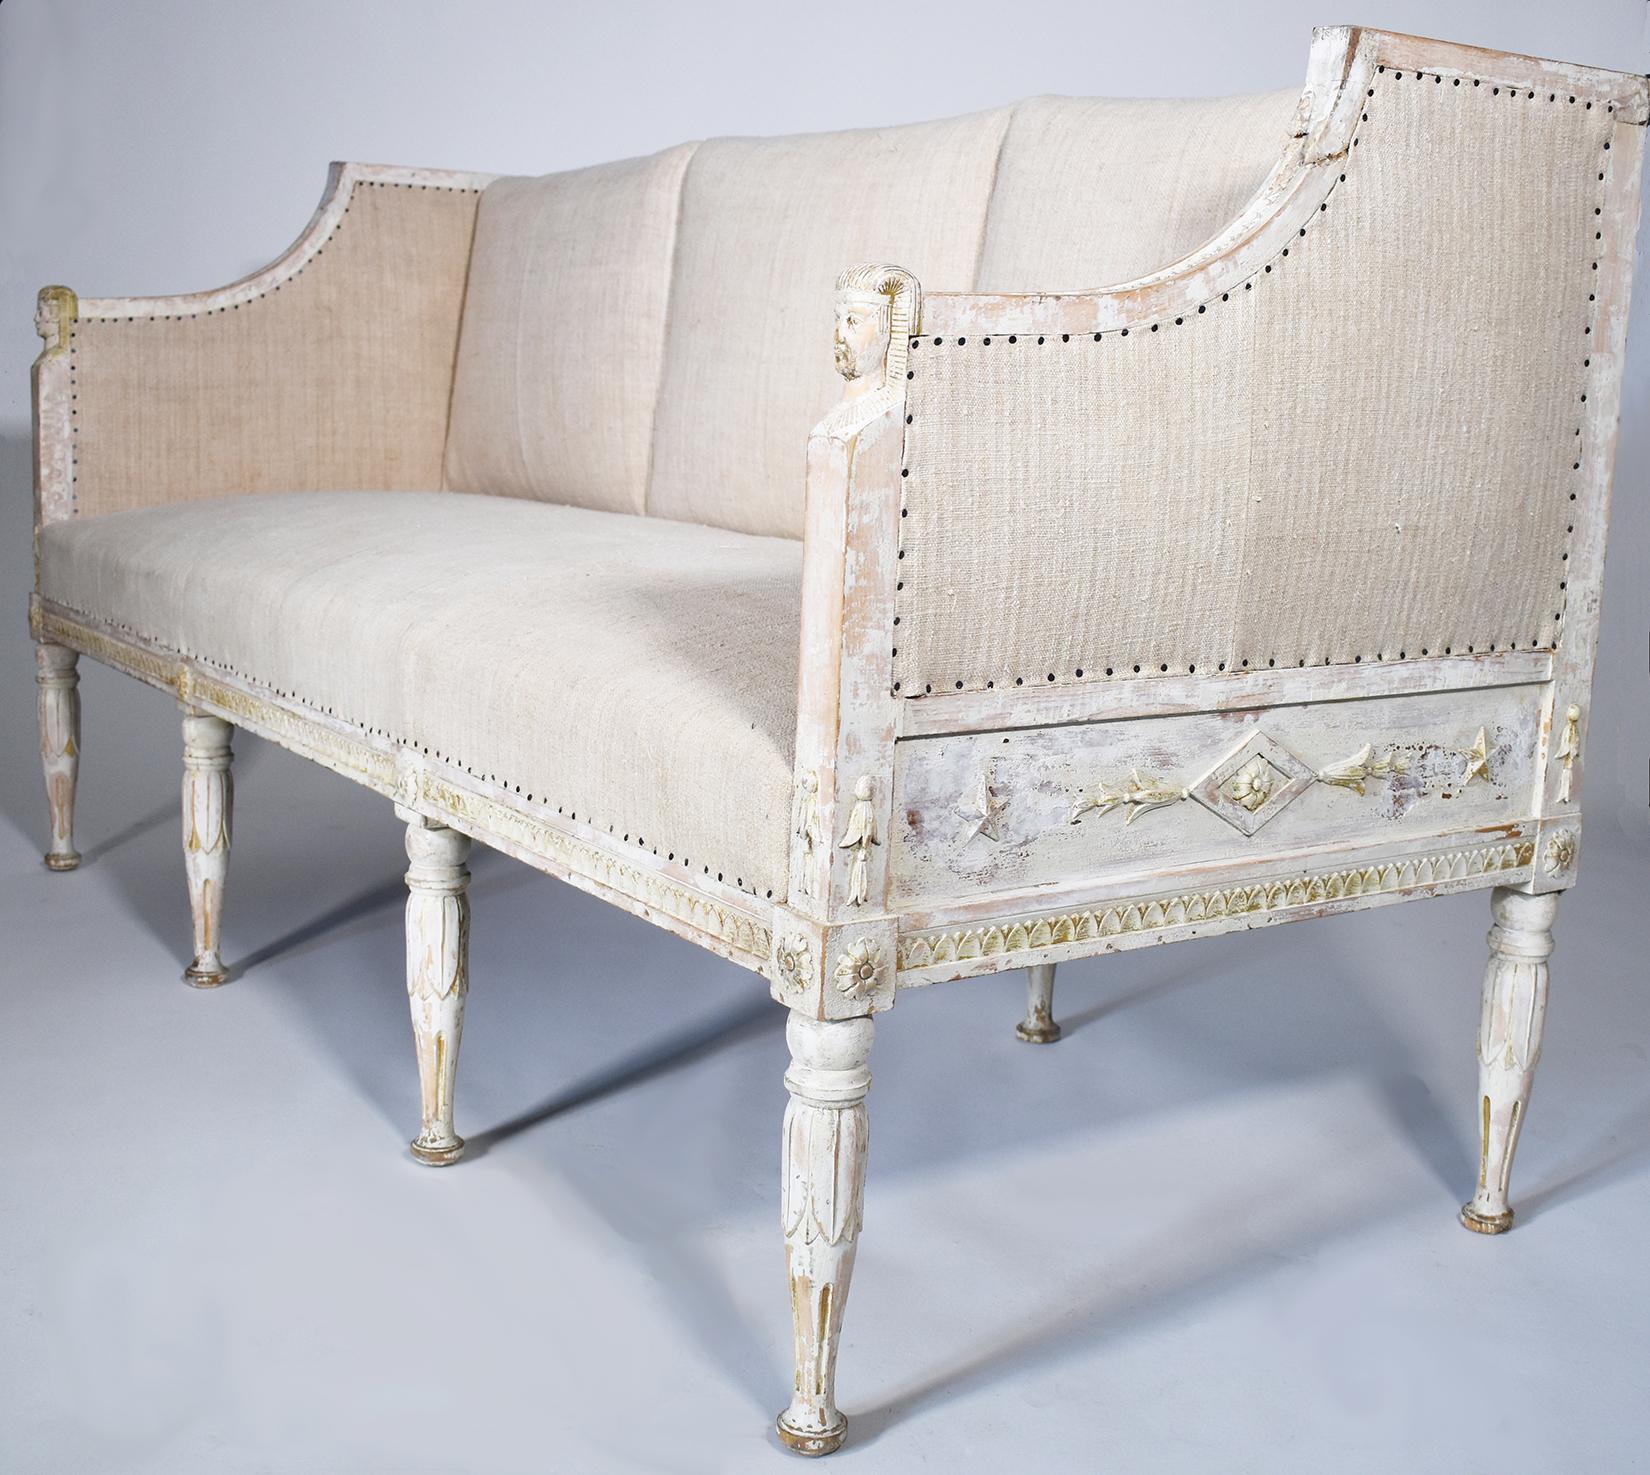 Stunning hand carved Swedish sofa with Egyptian influence and pale white grey patina over pine. Neoclassical carving detail on sides and legs. All pillows covered in a vintage European burlap.